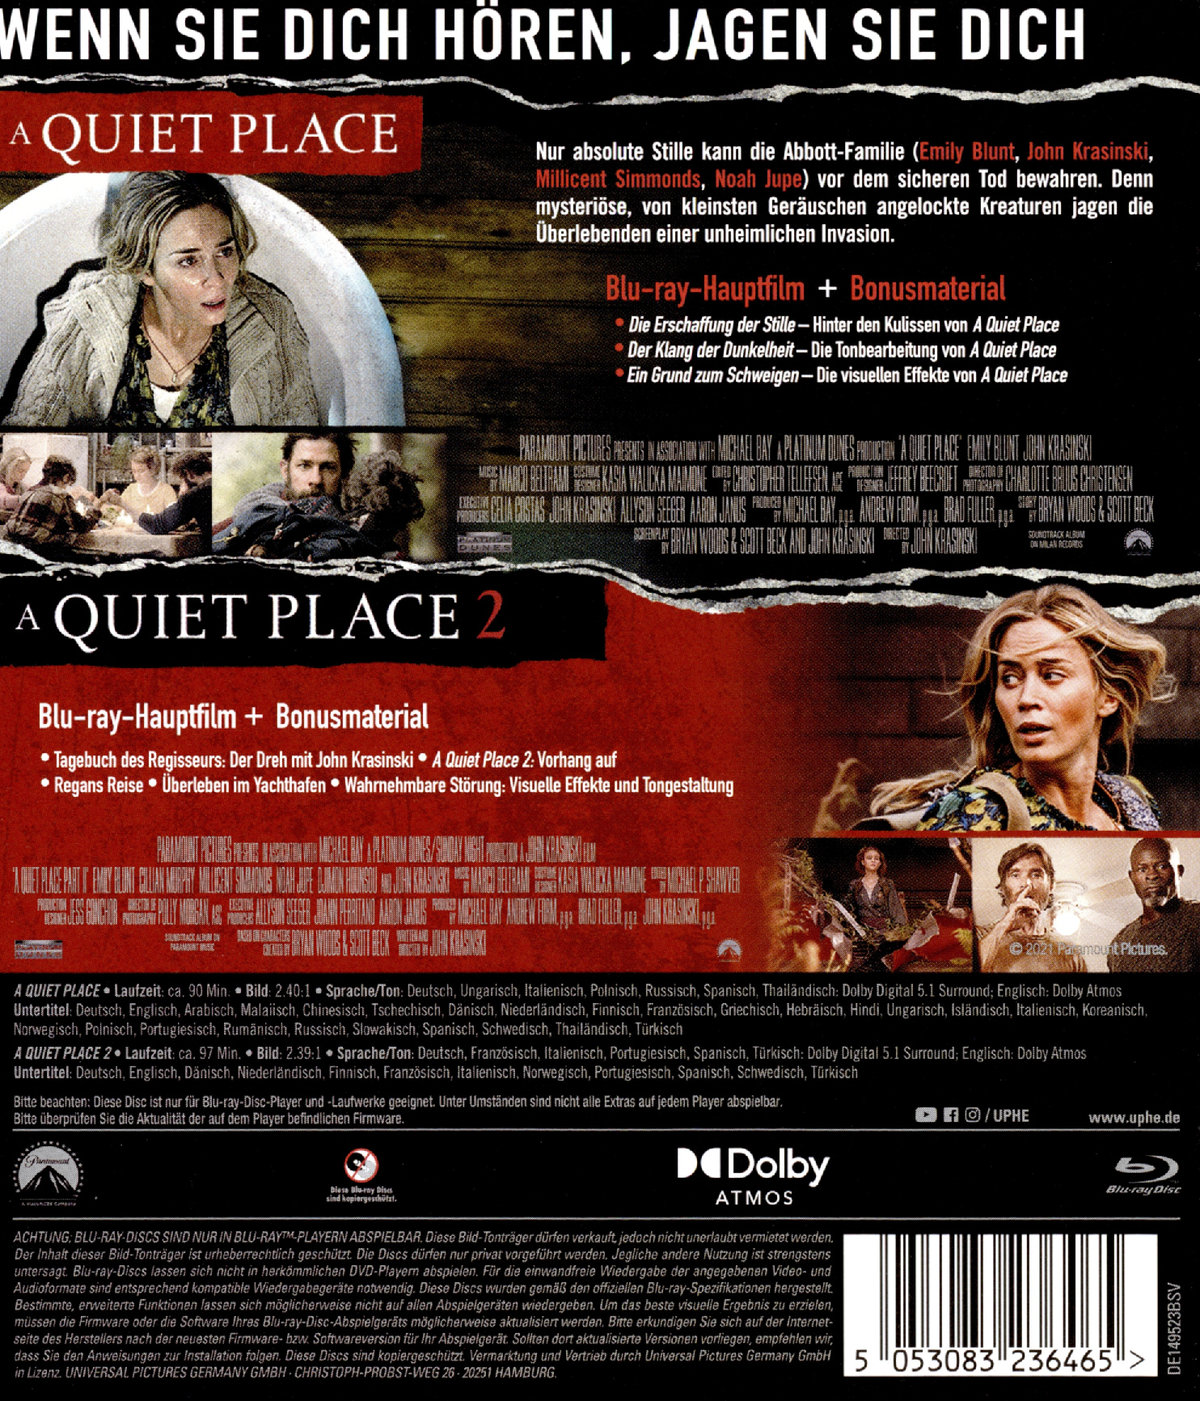 A Quiet Place - 2-Movie Collection (blu-ray)